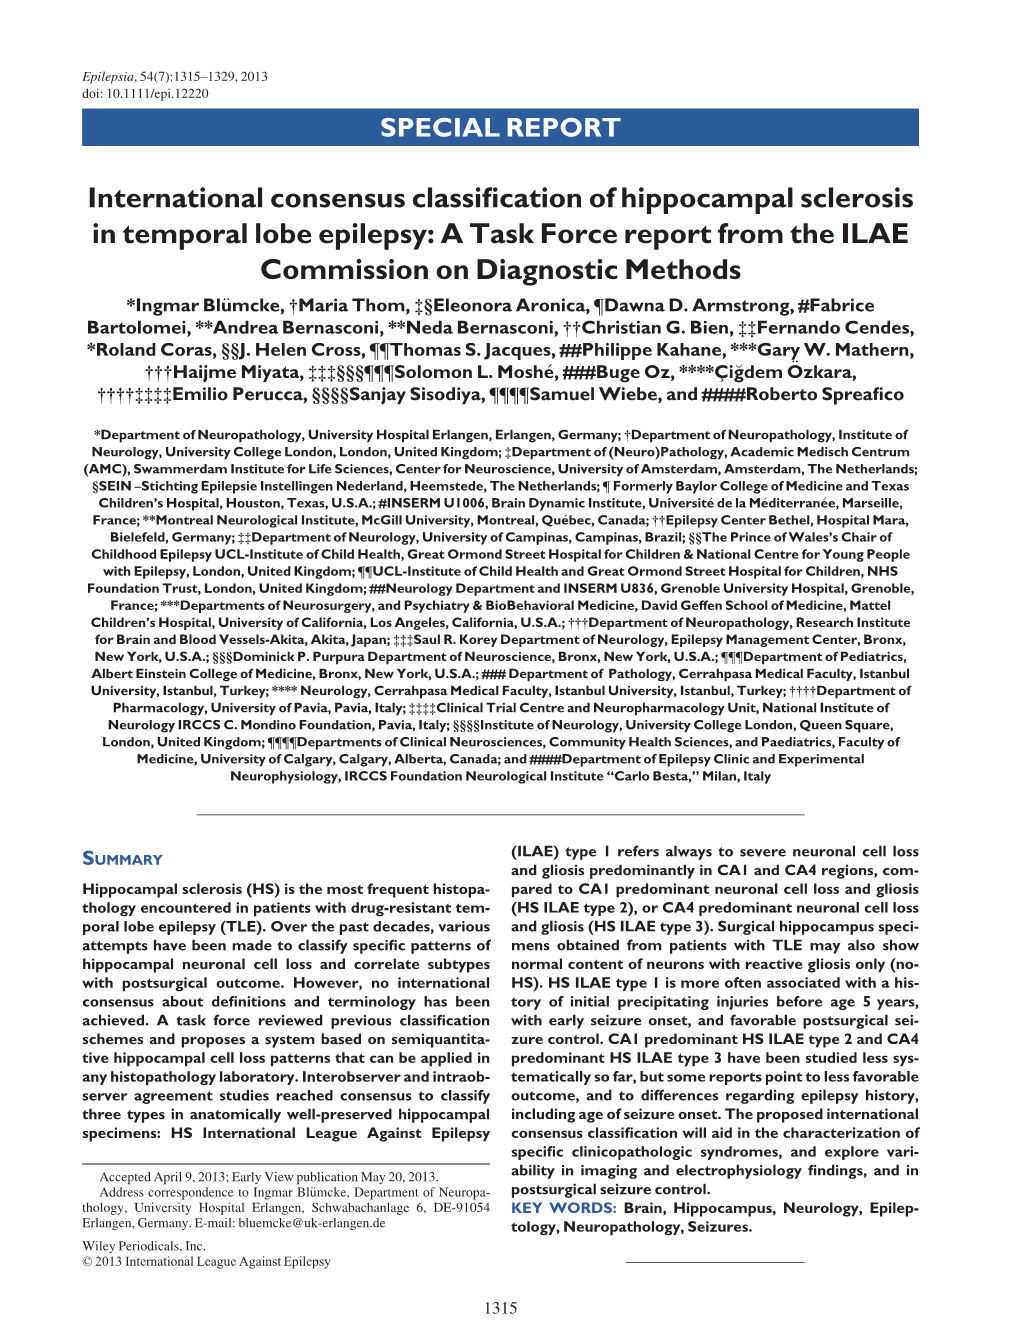 International Consensus Classification of Hippocampal Sclerosis In